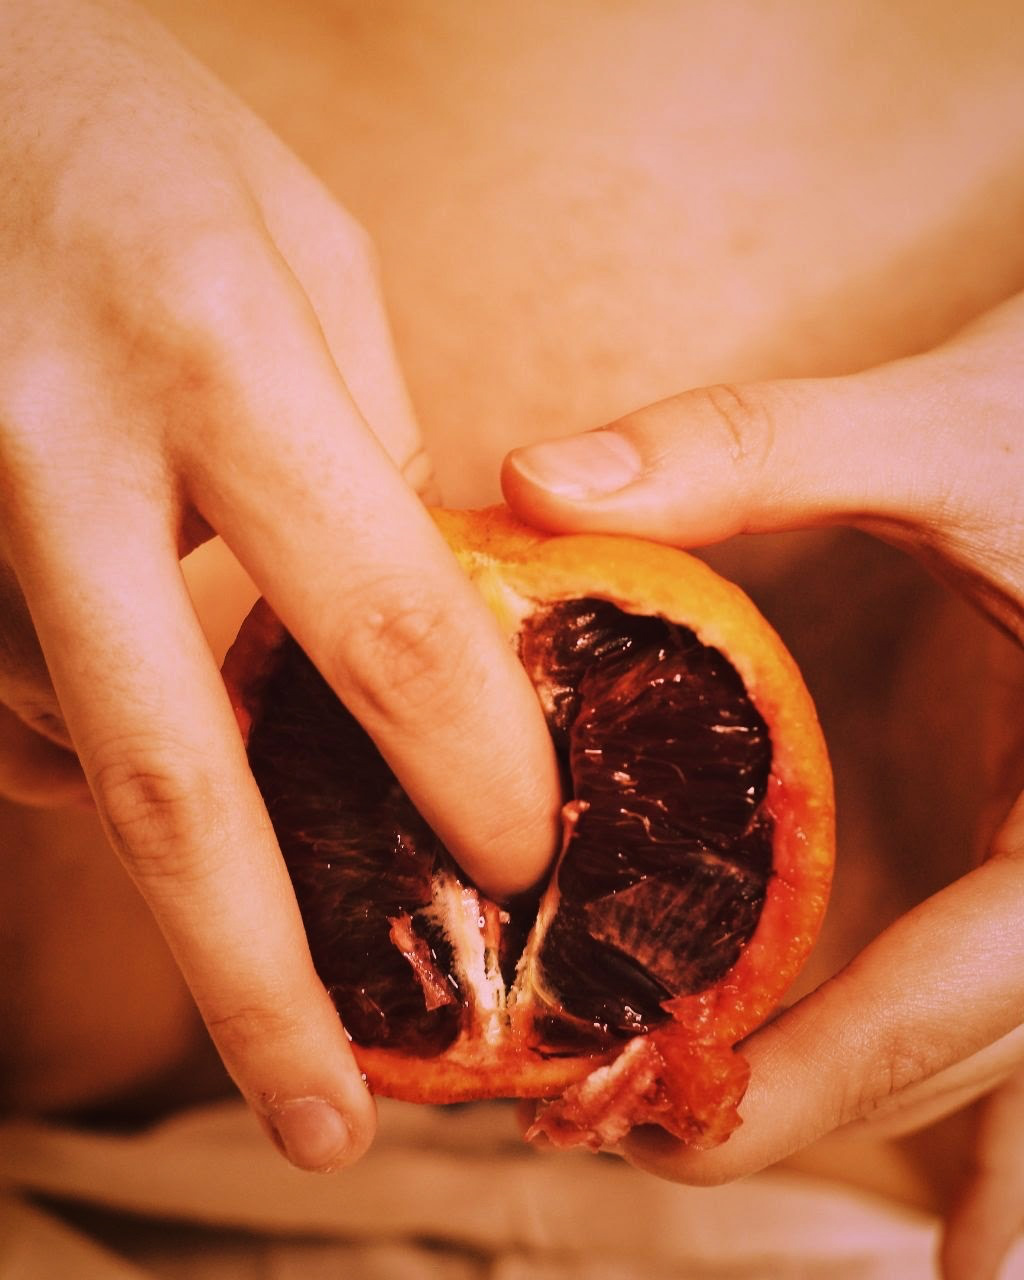 IMAGE: A hand inserts a finger into the open face of a halved fruit that has been placed in front of a person's pelvis.